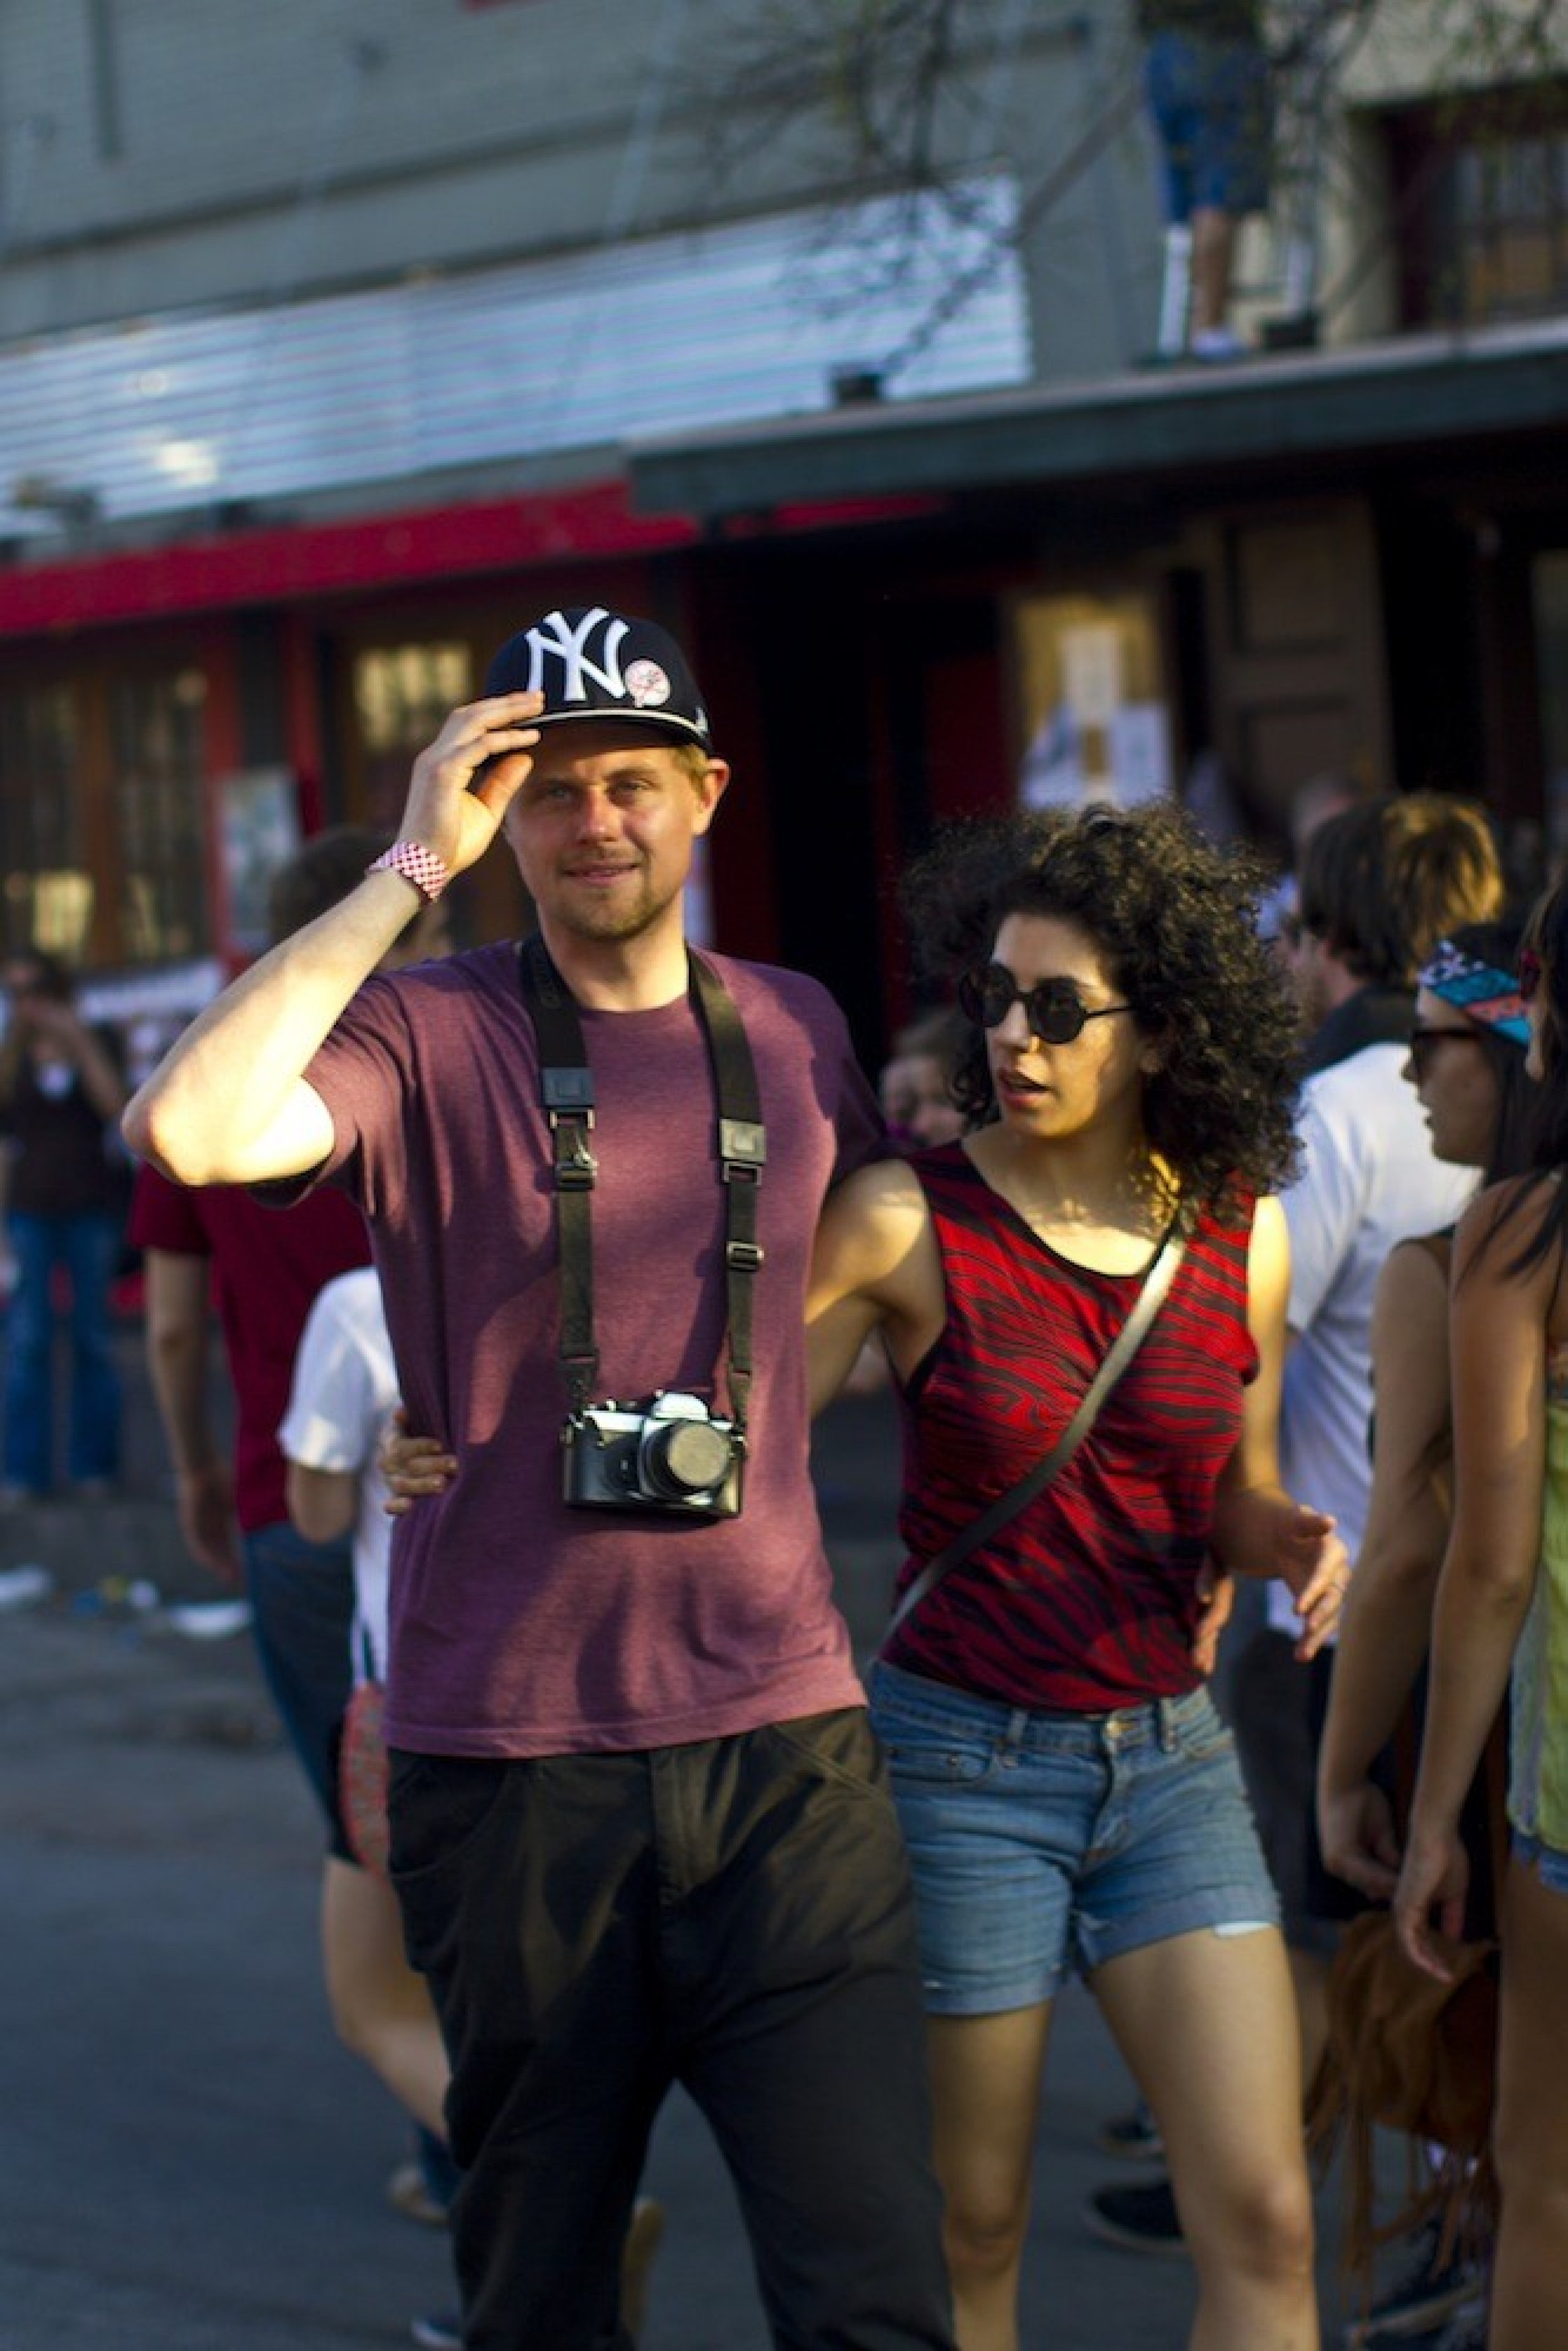 23 Photos of People With Cameras at SXSW 2012